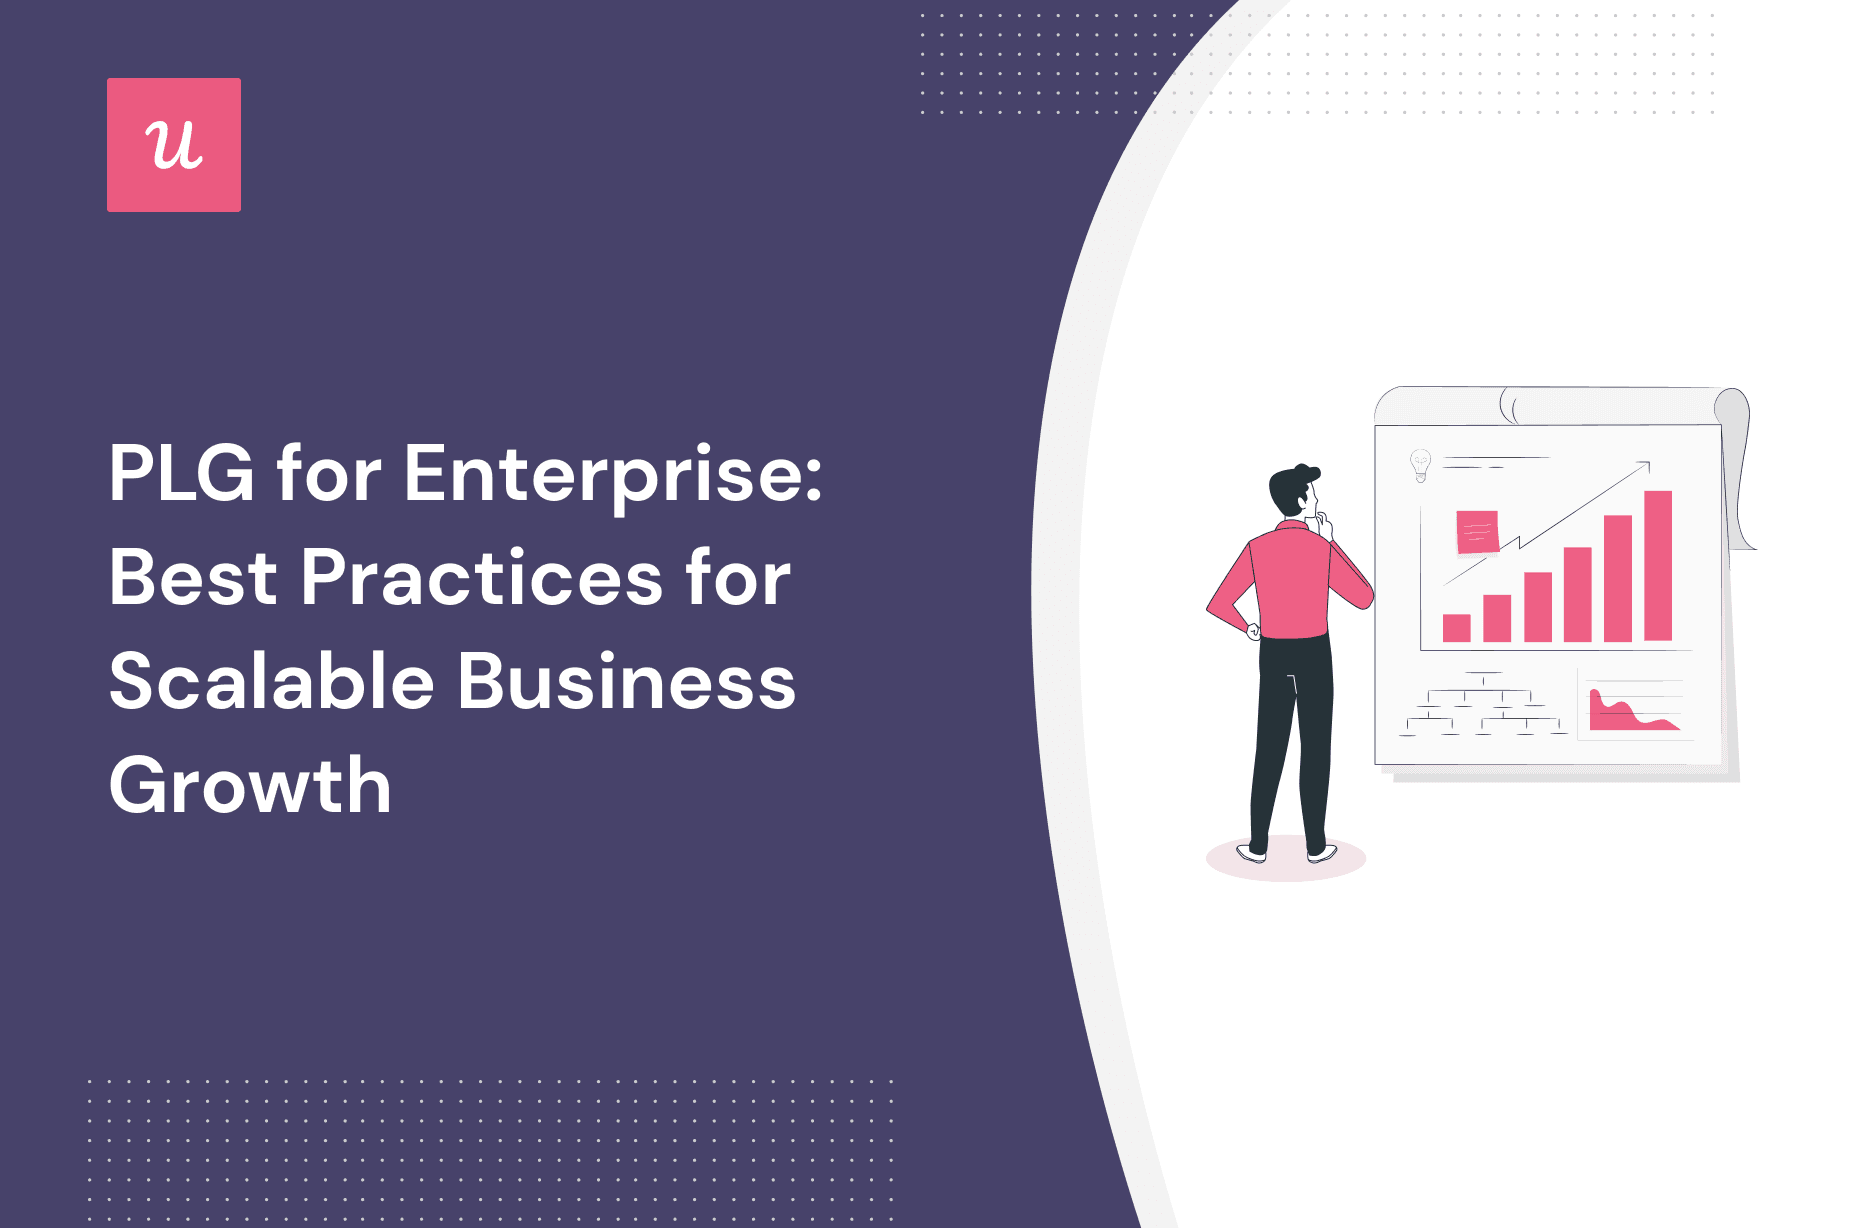 PLG for Enterprise: Best Practices for Scalable Business Growth cover